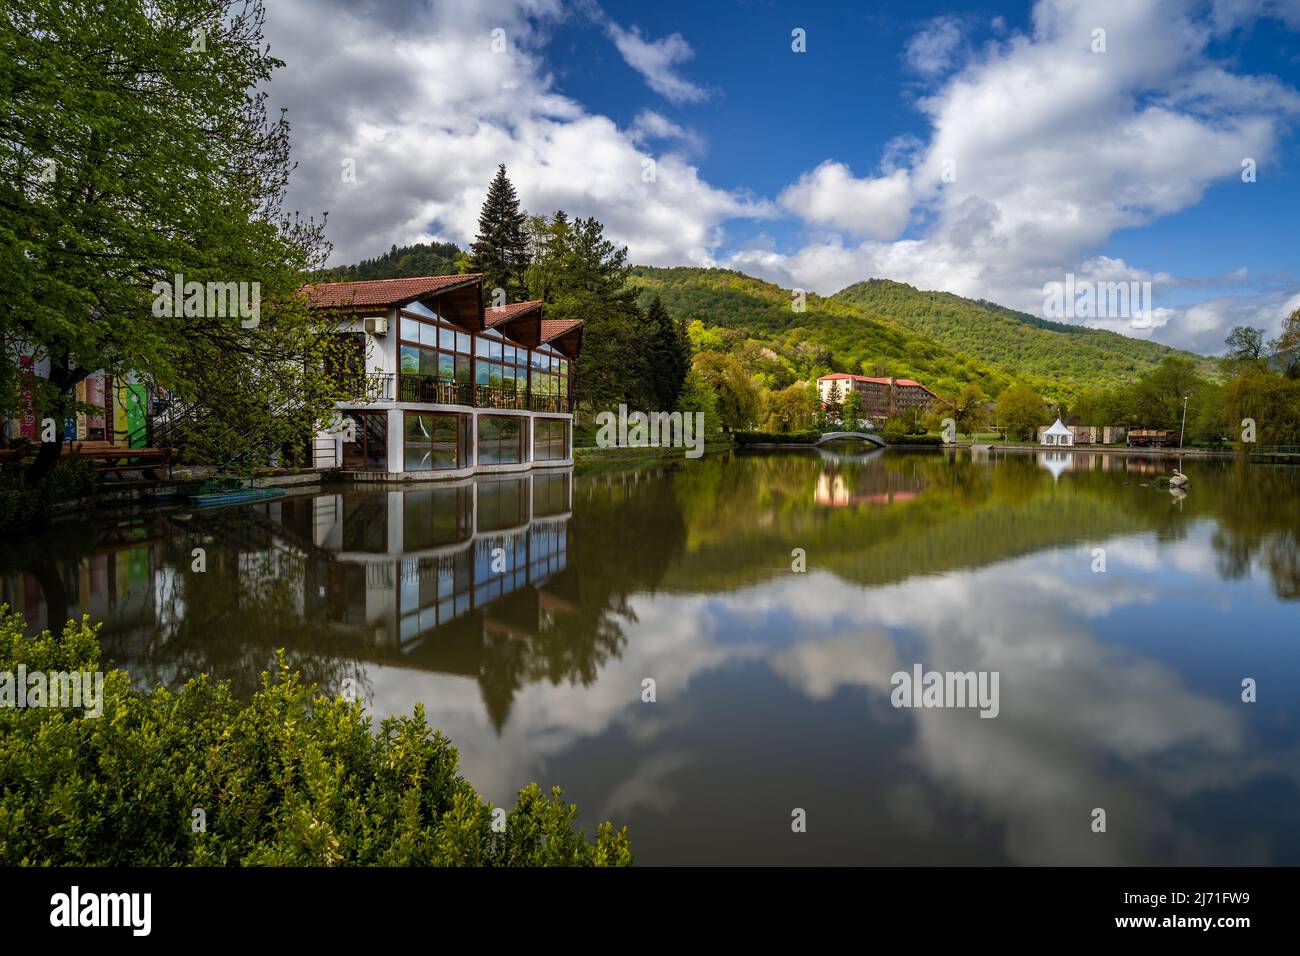 Dilijan, Armenia - May 4, 2022 - Clouds formation moving above the artificial city lake of Dilijan, Armenia Stock Photo